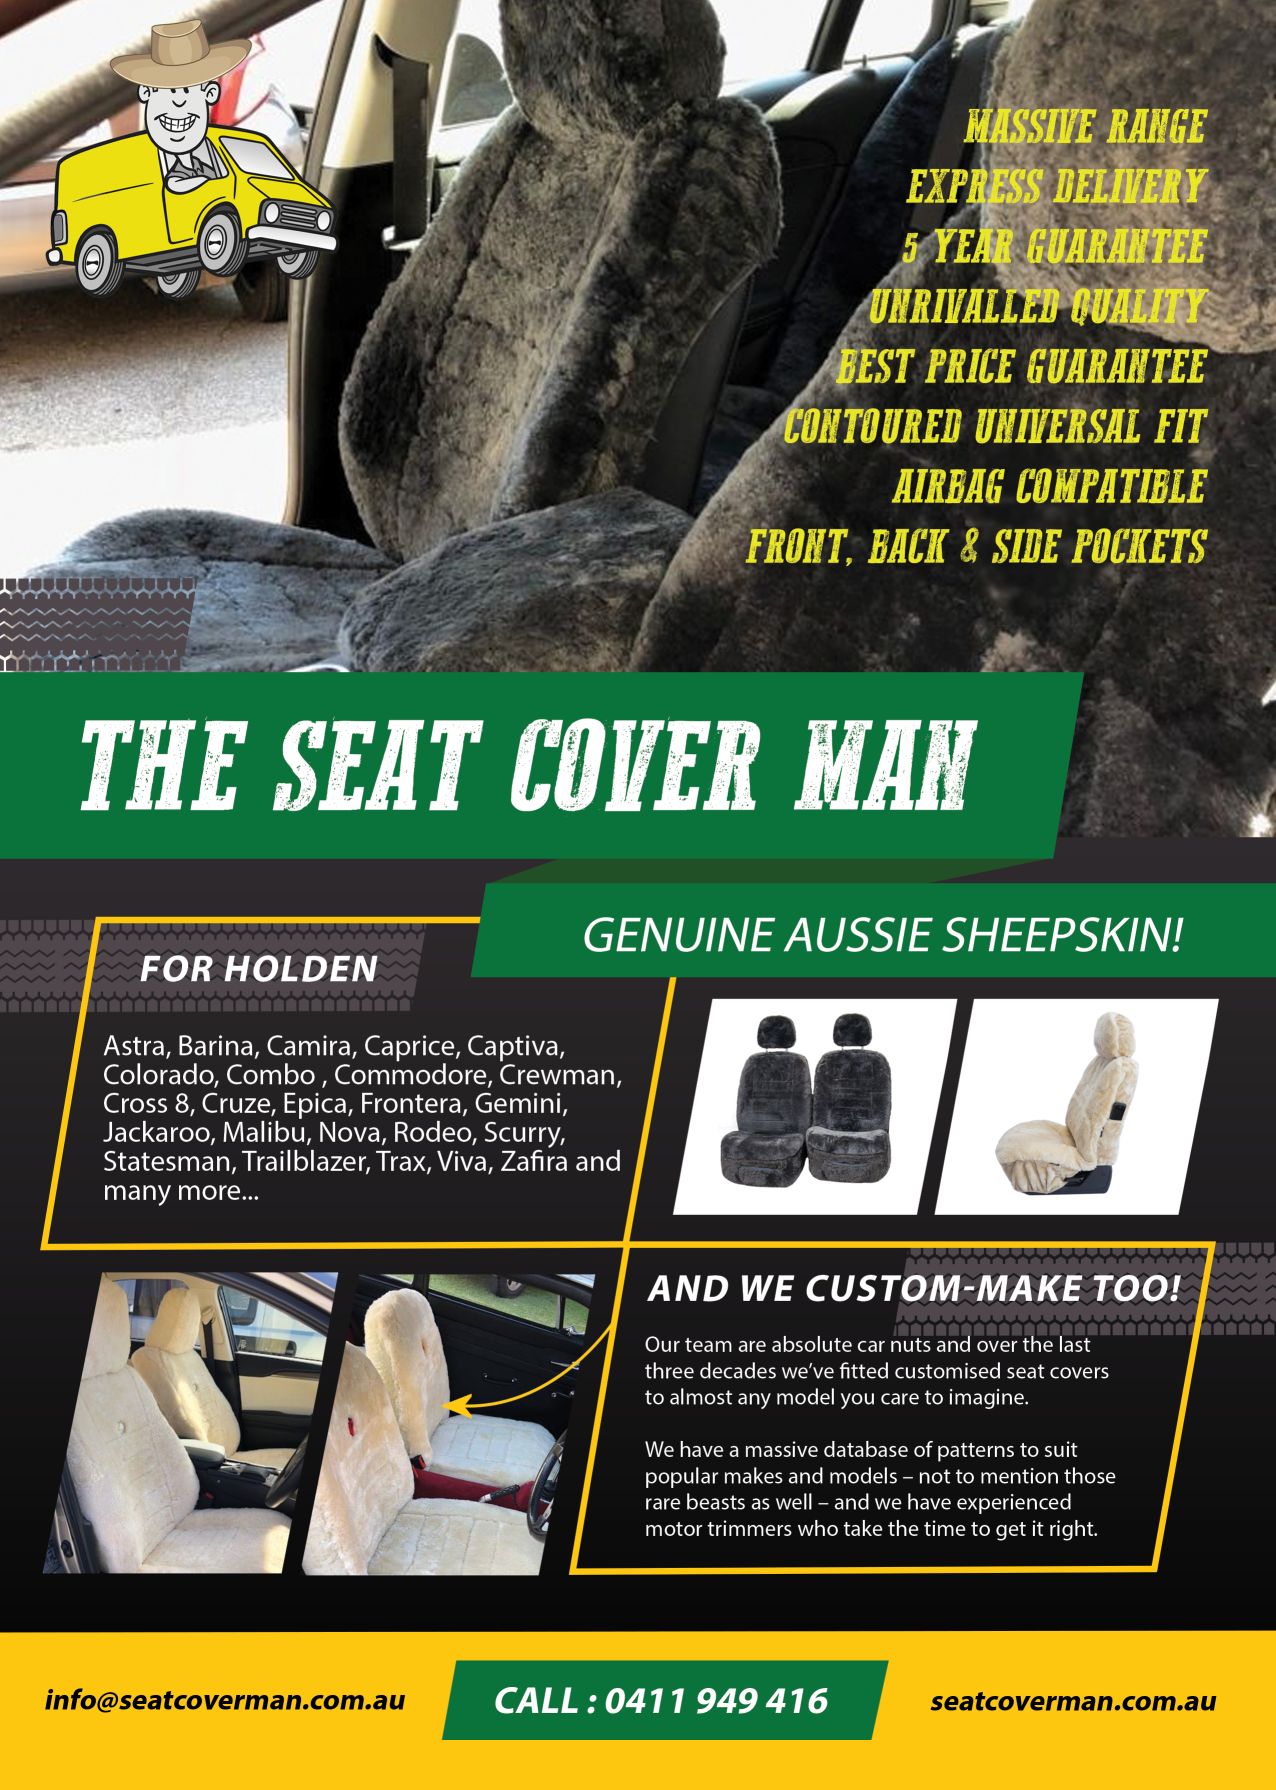 Sheepskin Seat Covers for Holden by The Seat Cover Man